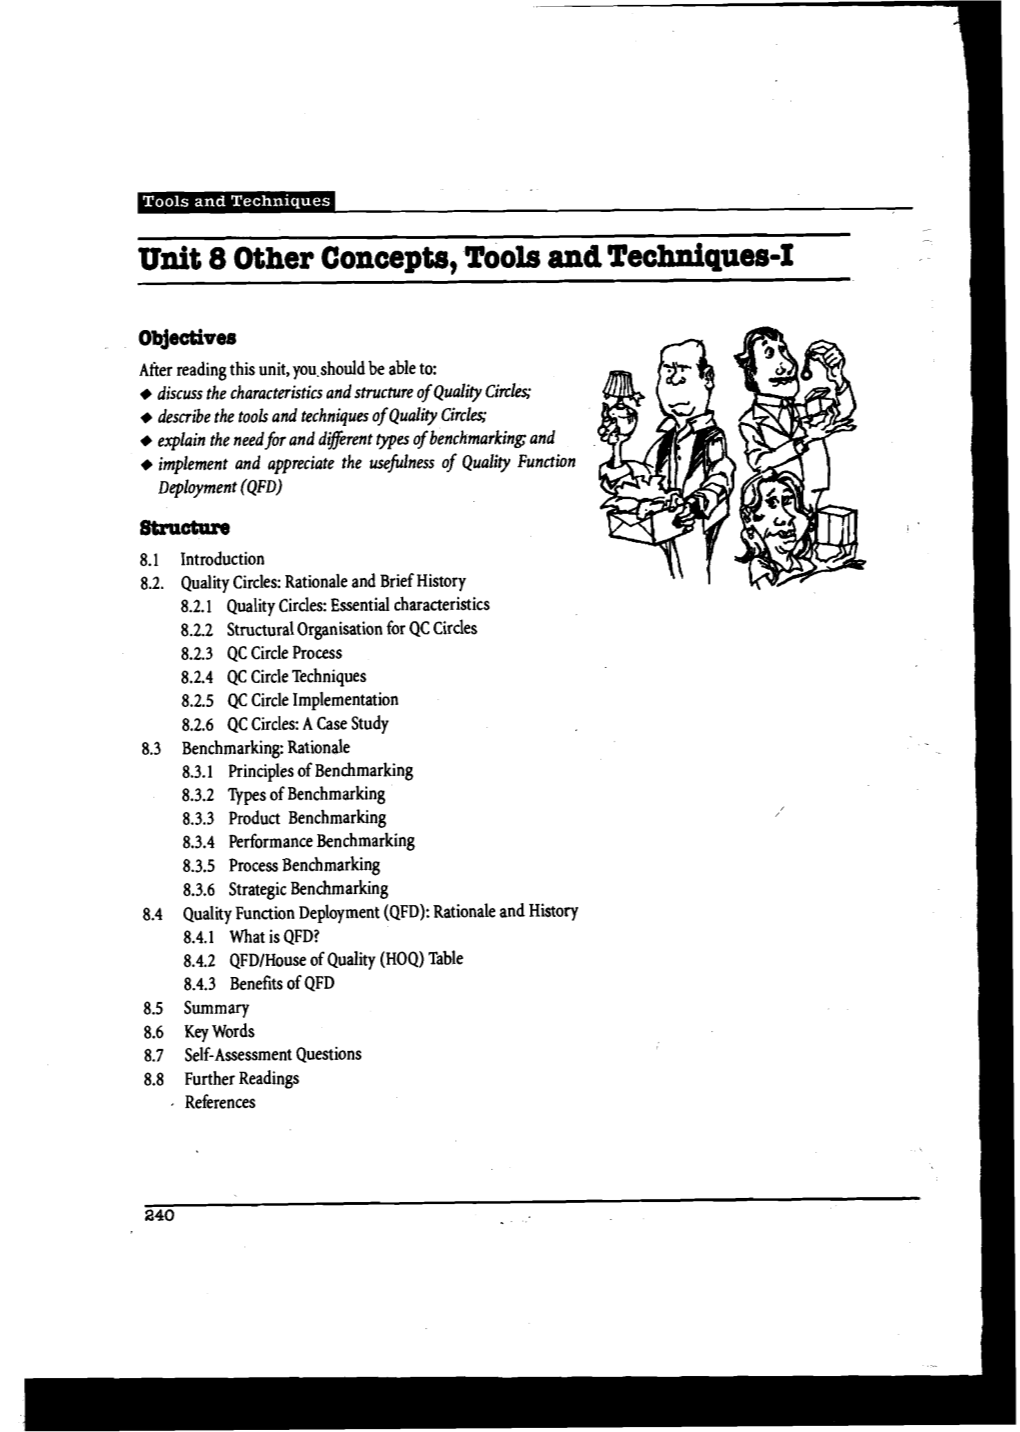 Unit 8 Other Concepts, Tools and Techniques-I